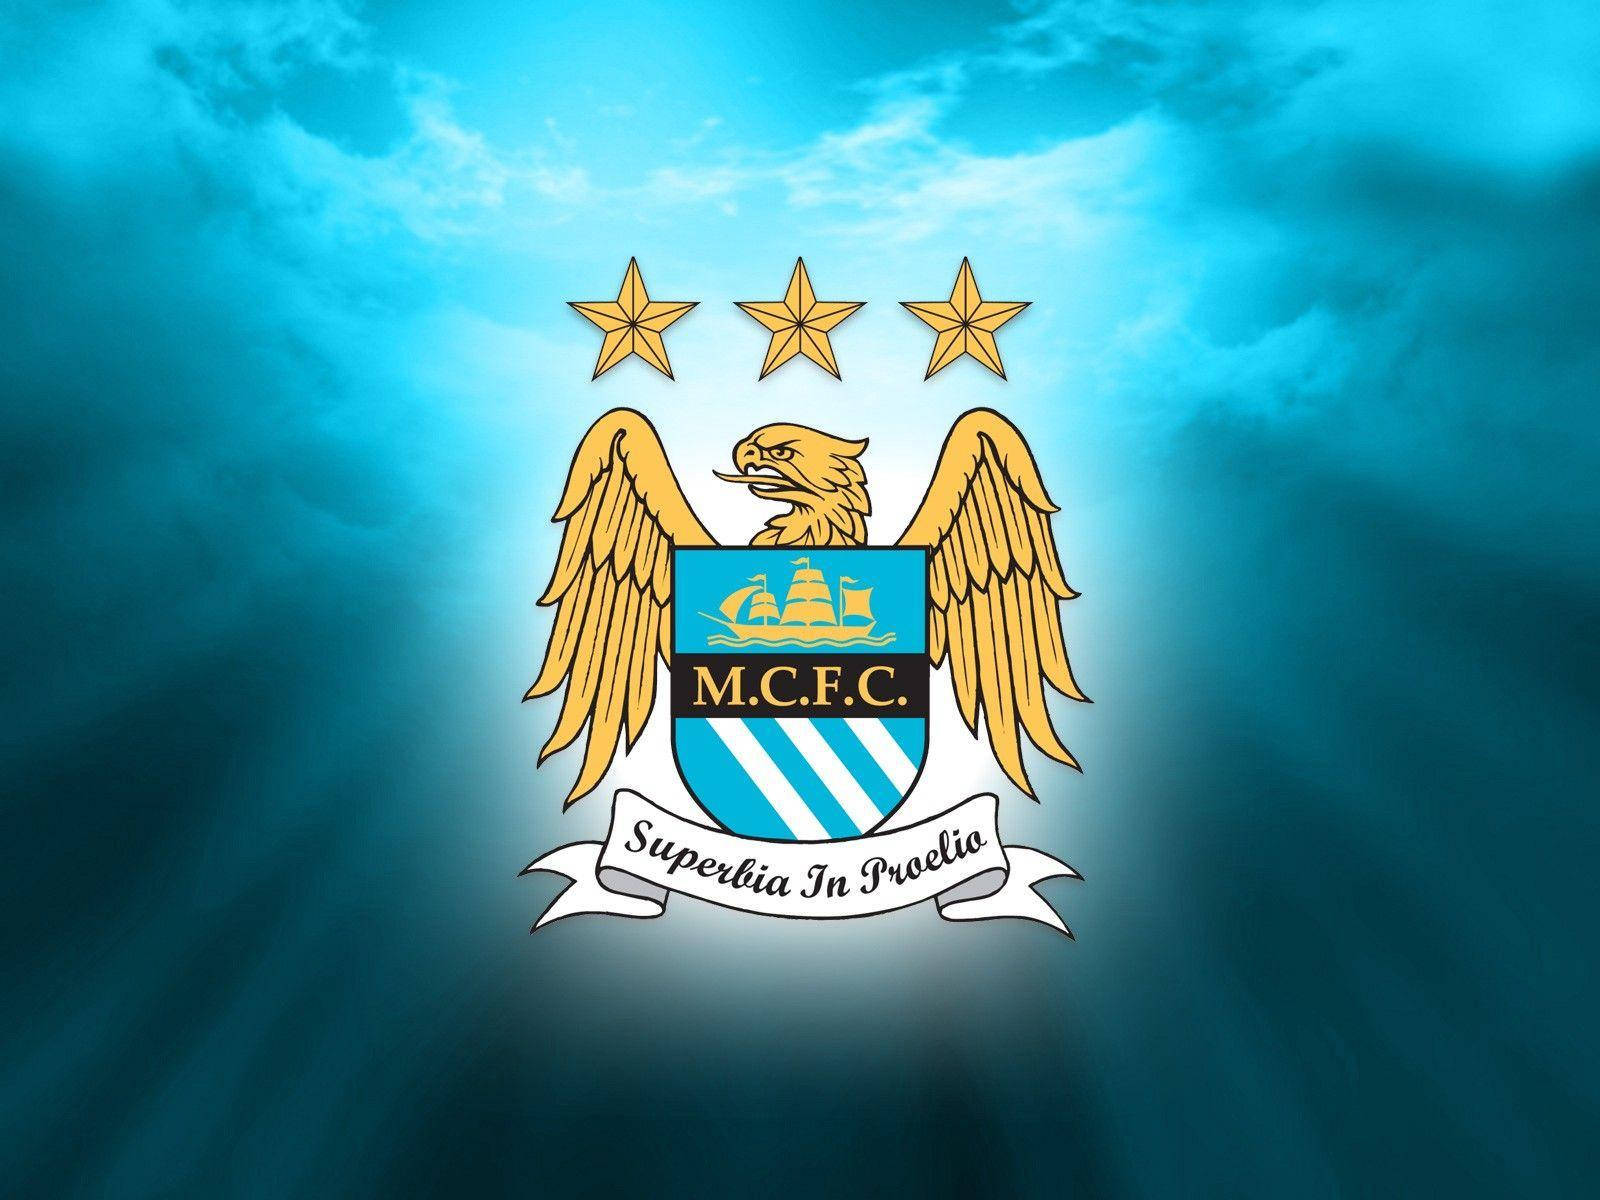 Manchester City Fc Logo Over Blue Cloudy Sky Background